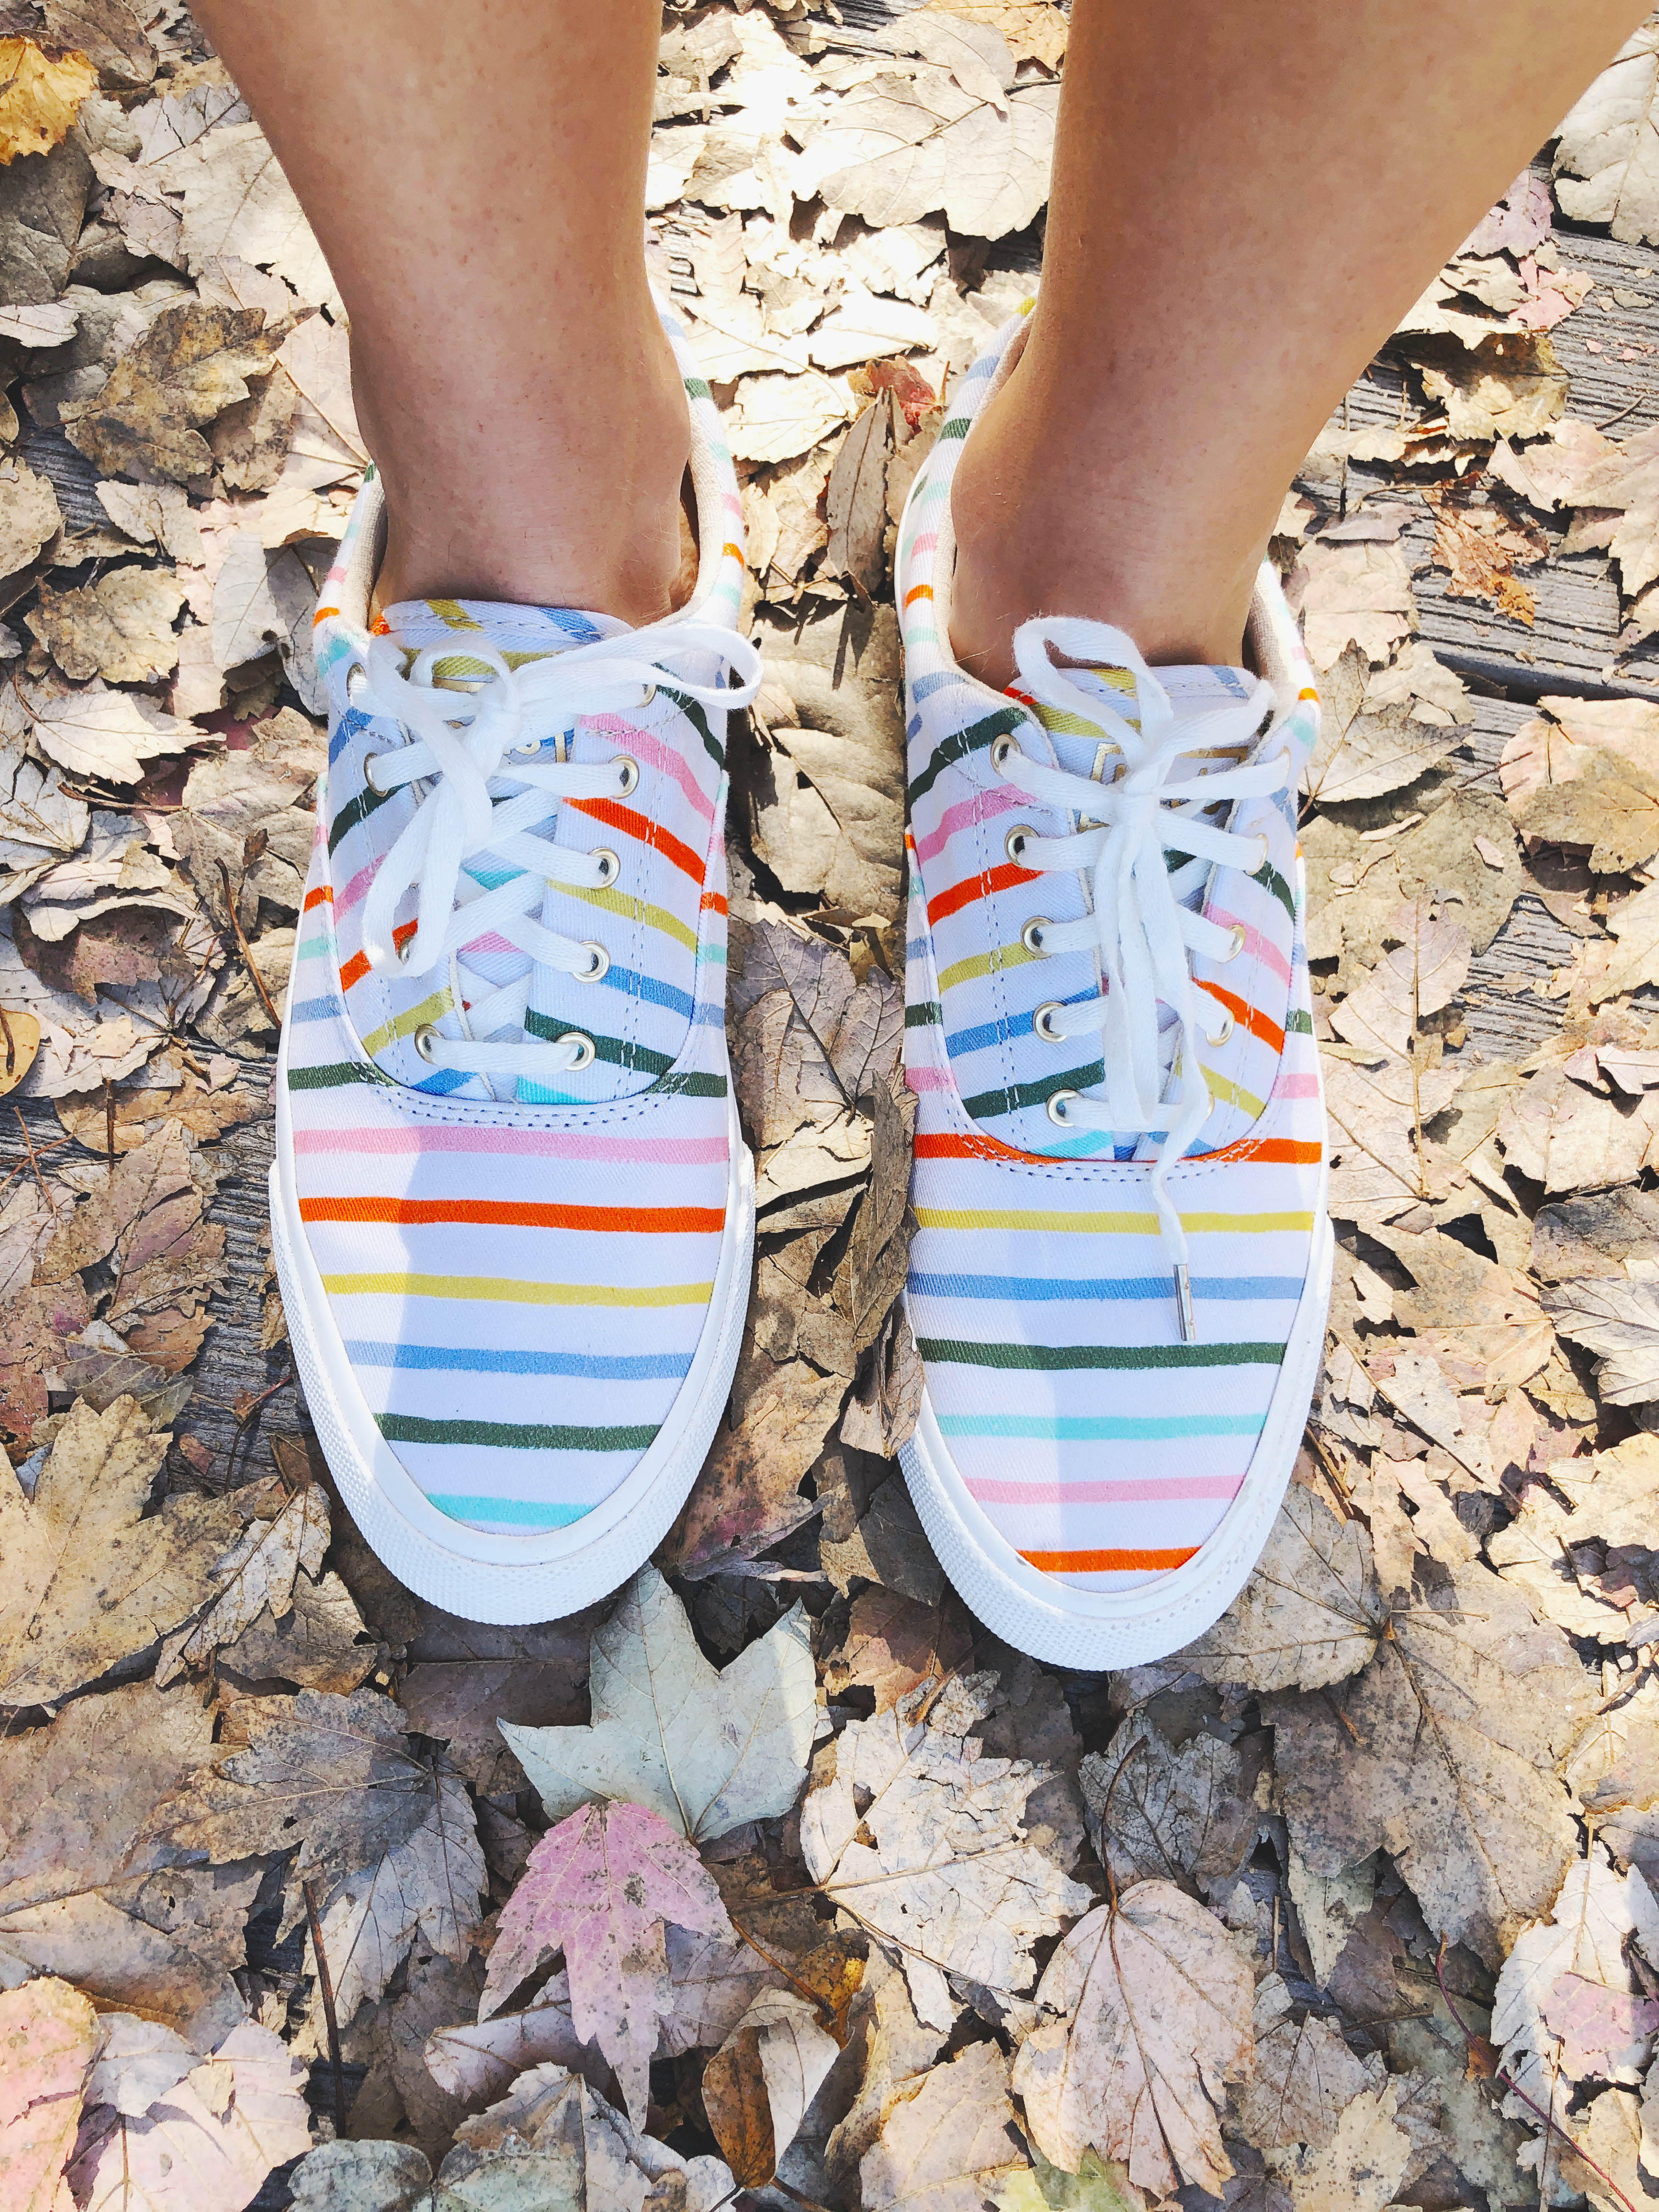 Rifle Paper Co. X KEDS Shoes / What to Wear for Outdoor Adventures / Keds Sneaker / Rifle Paper Co. for Keds Striped Sneaker / Outdoor Adventure Activity / Bike Ride Trail / Pink Puffer Jacket / How to Wear Denim Shorts / How to Style Denim Shorts / Outdoor Style Women / How to Style Sneakers - Katie McCarty of Sunshine Style, Florida Fashion and Travel Blog